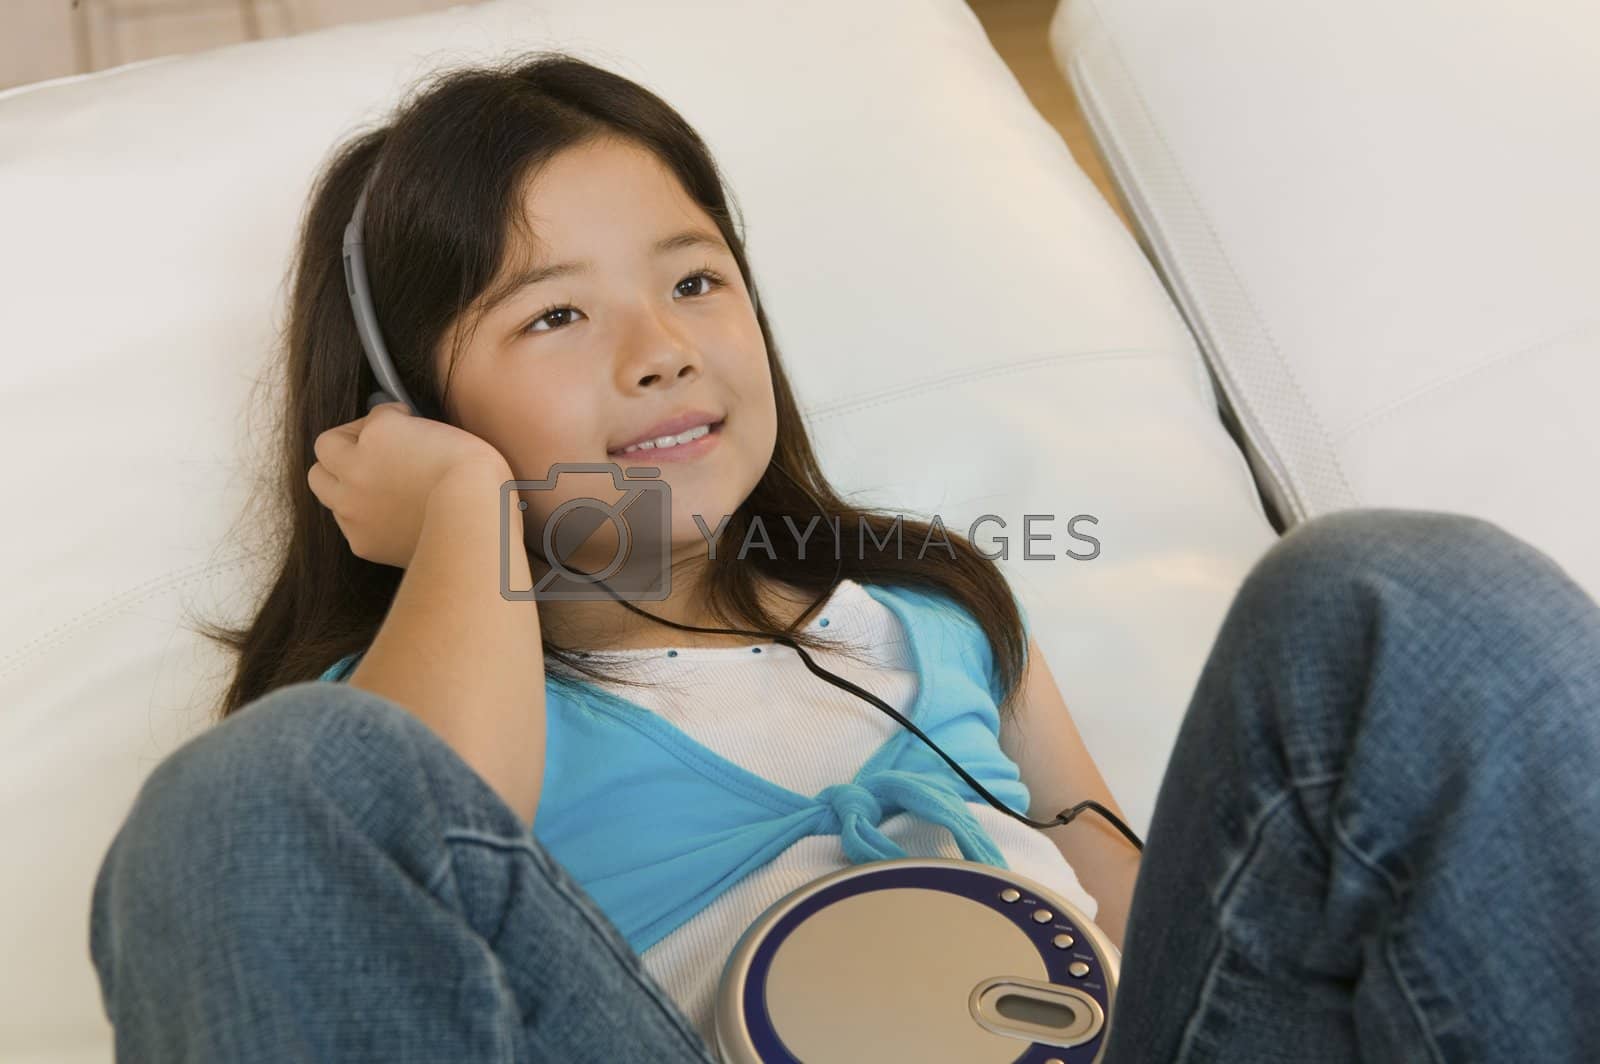 Royalty free image of Girl Listening to Music on CD Player by moodboard